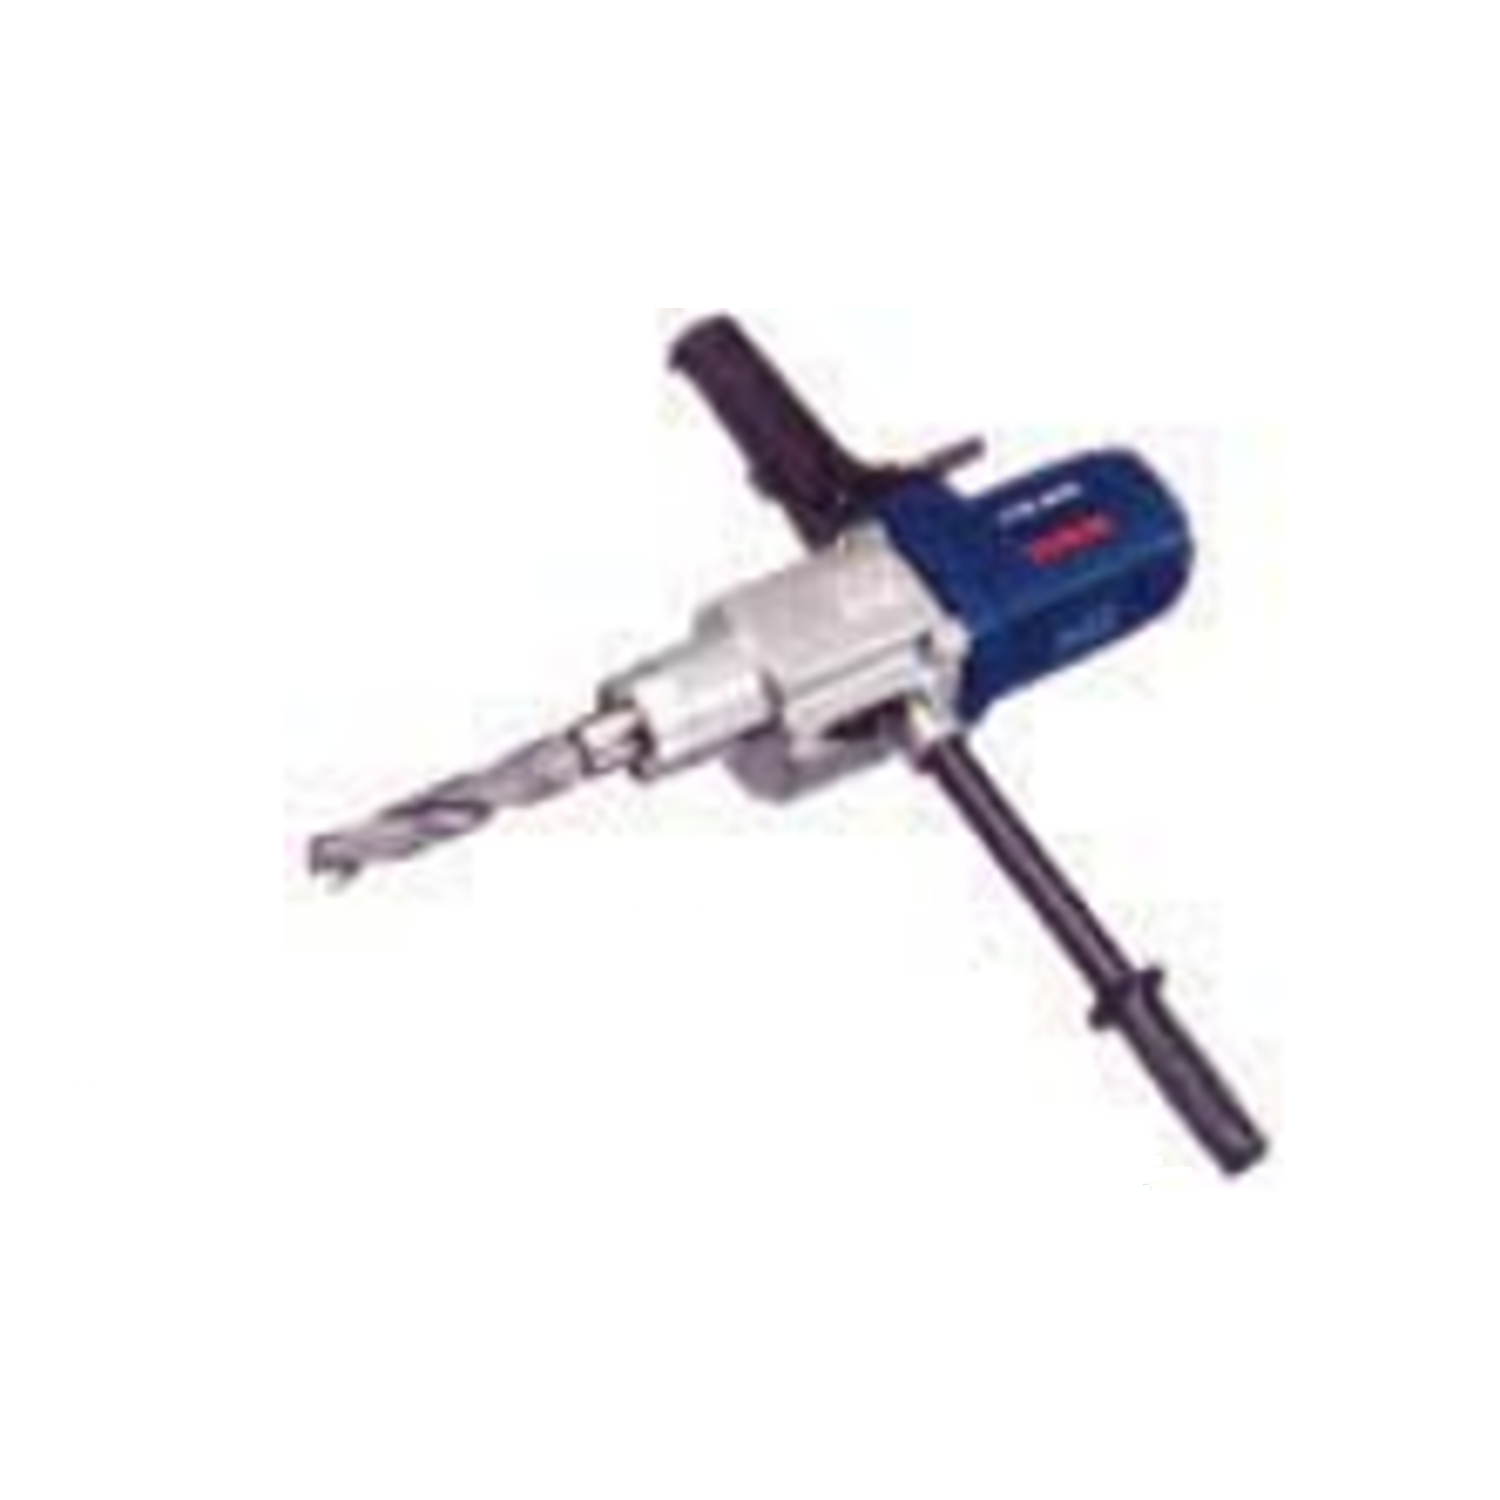 YEW AIK AC20074 Drill Power Tools GBM 32-4 - Premium Power Tools from YEW AIK - Shop now at Yew Aik.